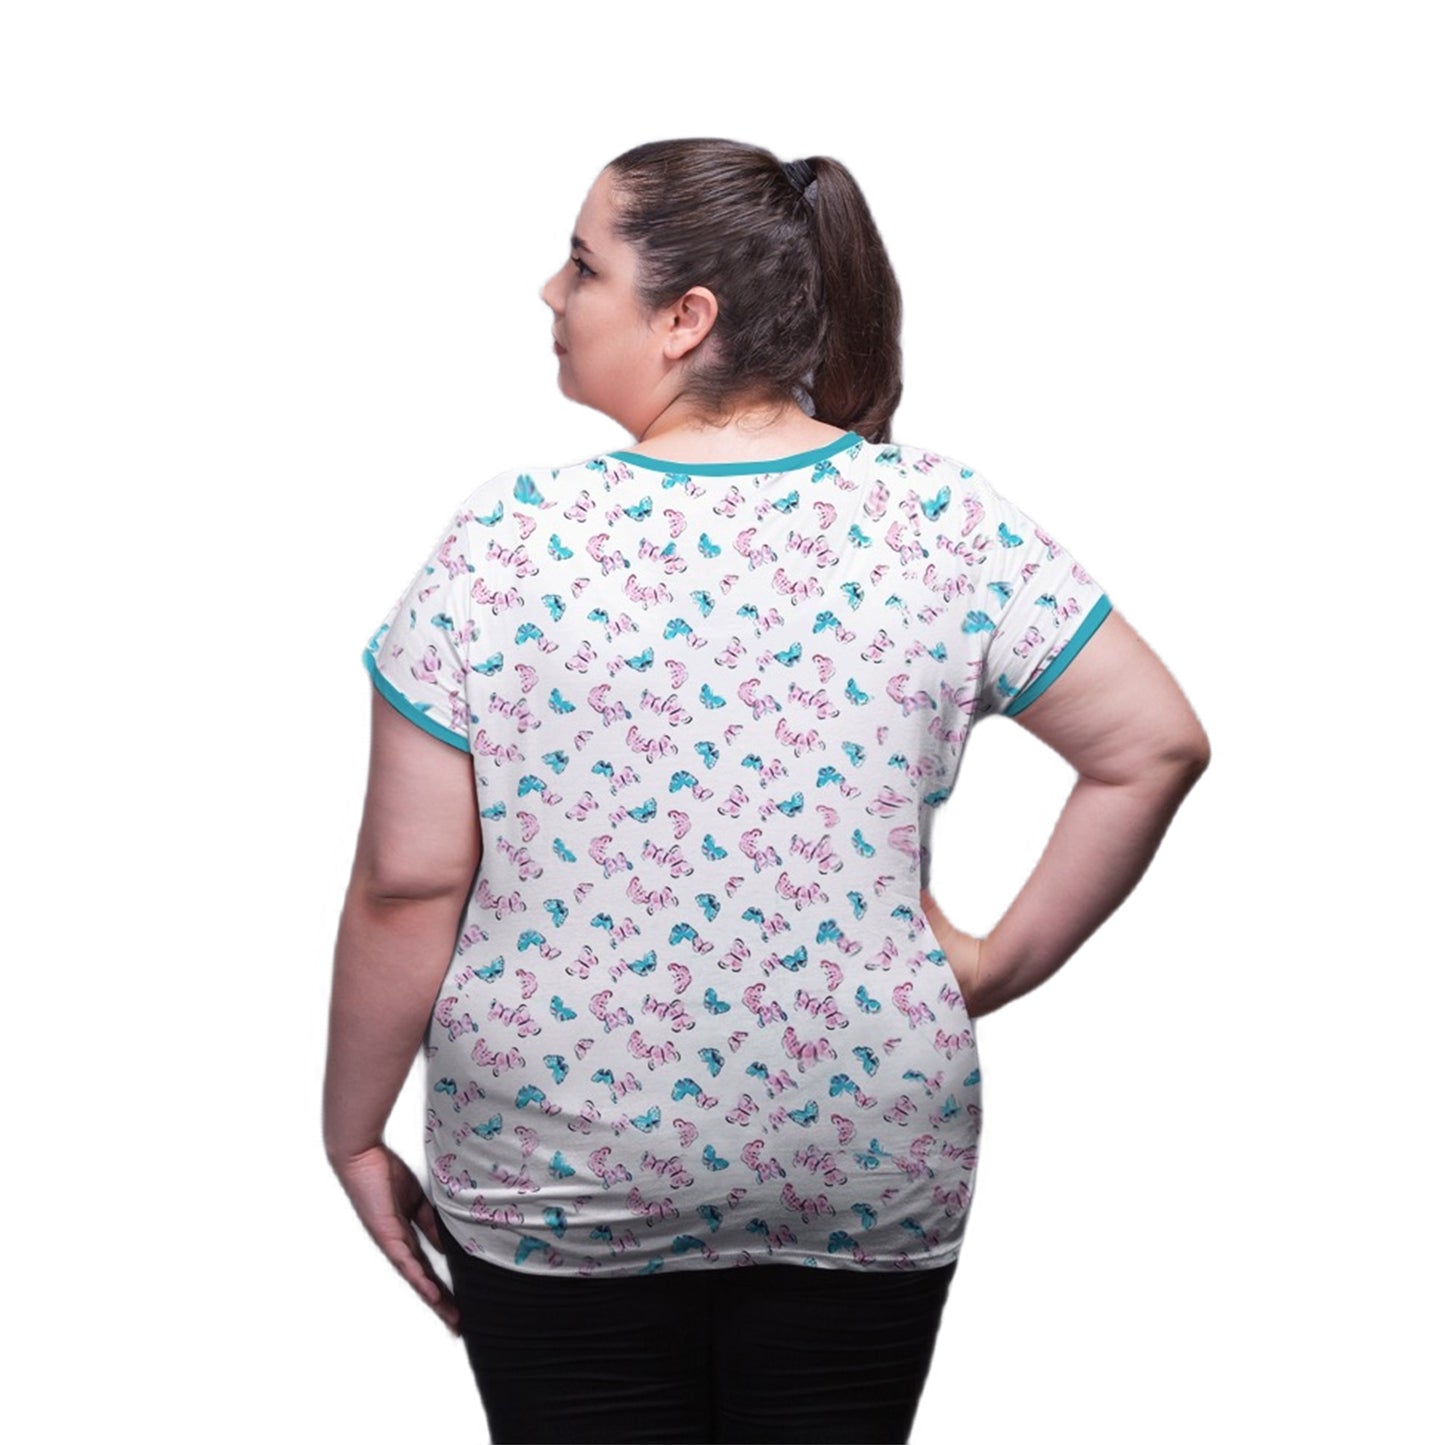 NEO GARMENTS Women's Cotton Round Neck PLUS size T-shirt - BUTTERFLY. | SIZE FROM S - 32" TO 8XL - 52"